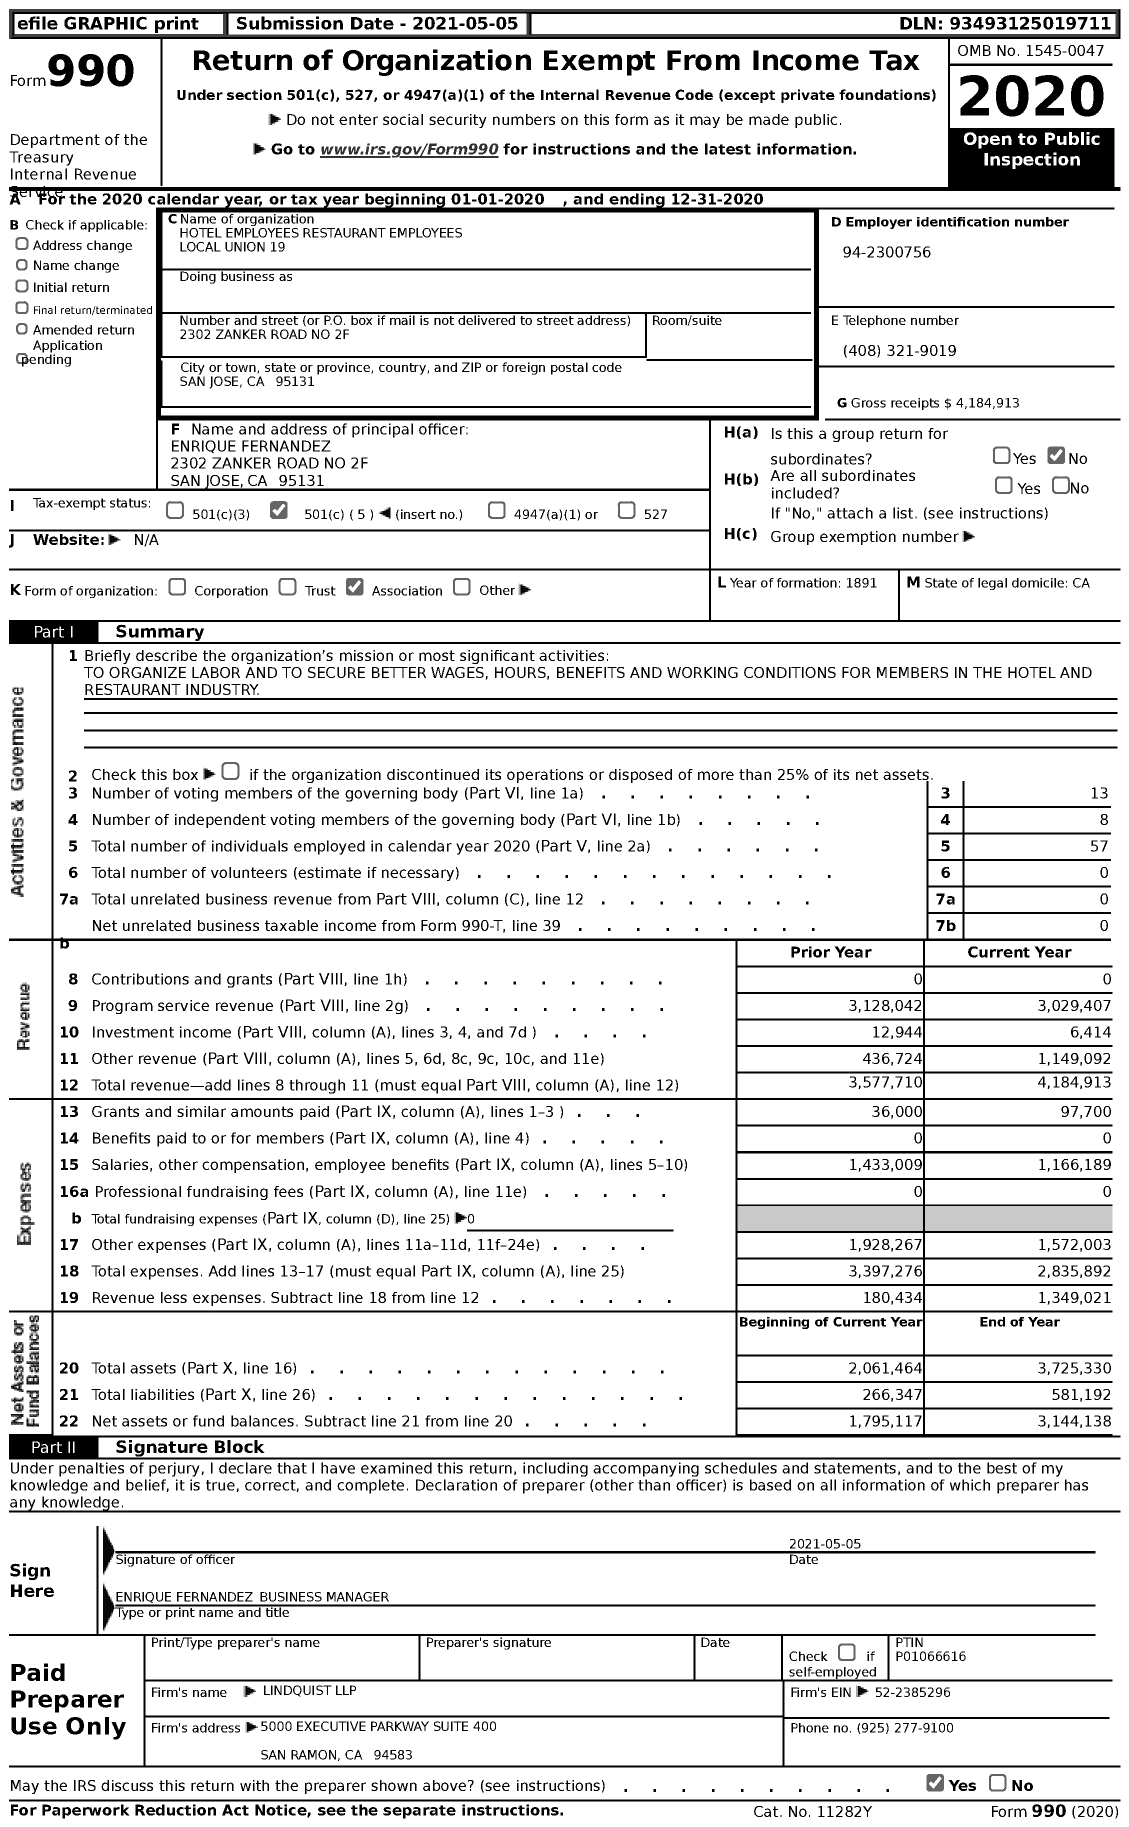 Image of first page of 2020 Form 990 for Unite Here - Hotel Employees Restaurant Employees Local Union 19